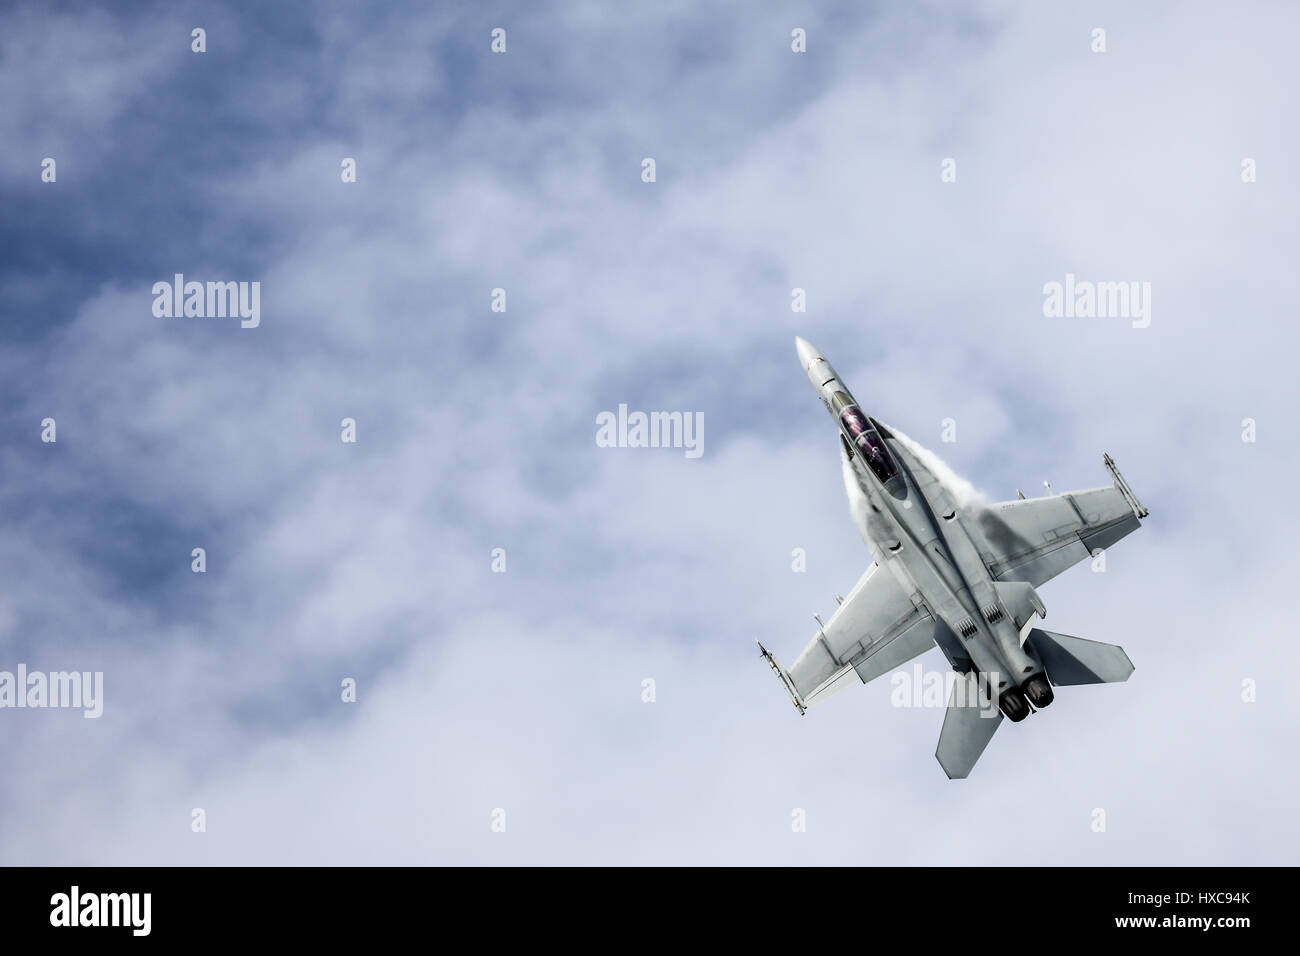 MELBOURNE, AUSTRALIA - MARCH 24: An Royal Australian Air Force FA18F Super Hornet performs in a public display above Melbourne on March 24, 2017 Stock Photo